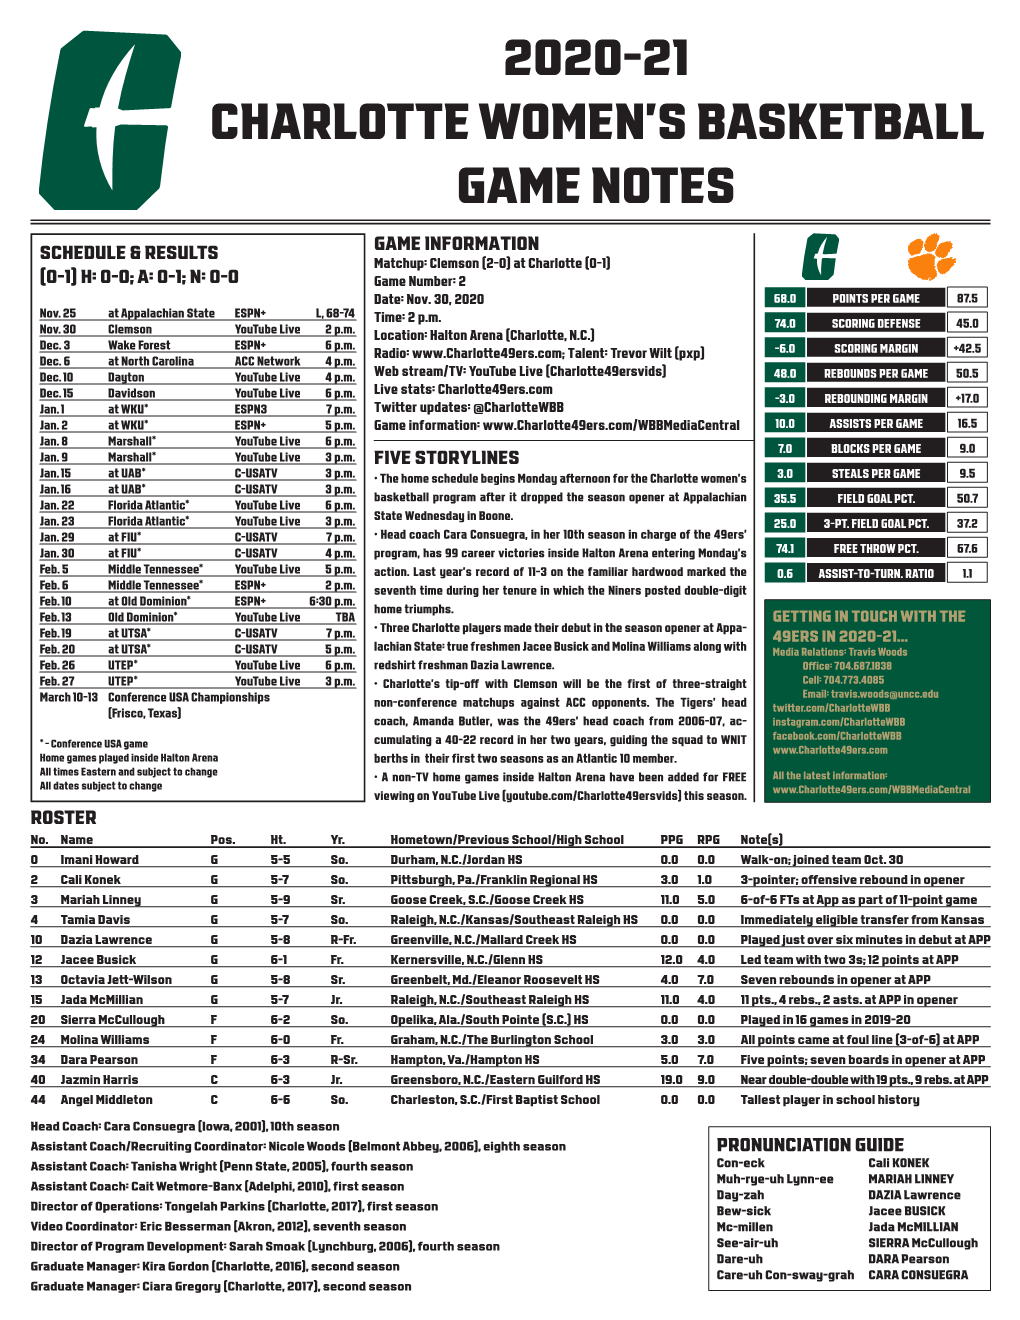 2020-21 Charlotte Women's Basketball Game Notes